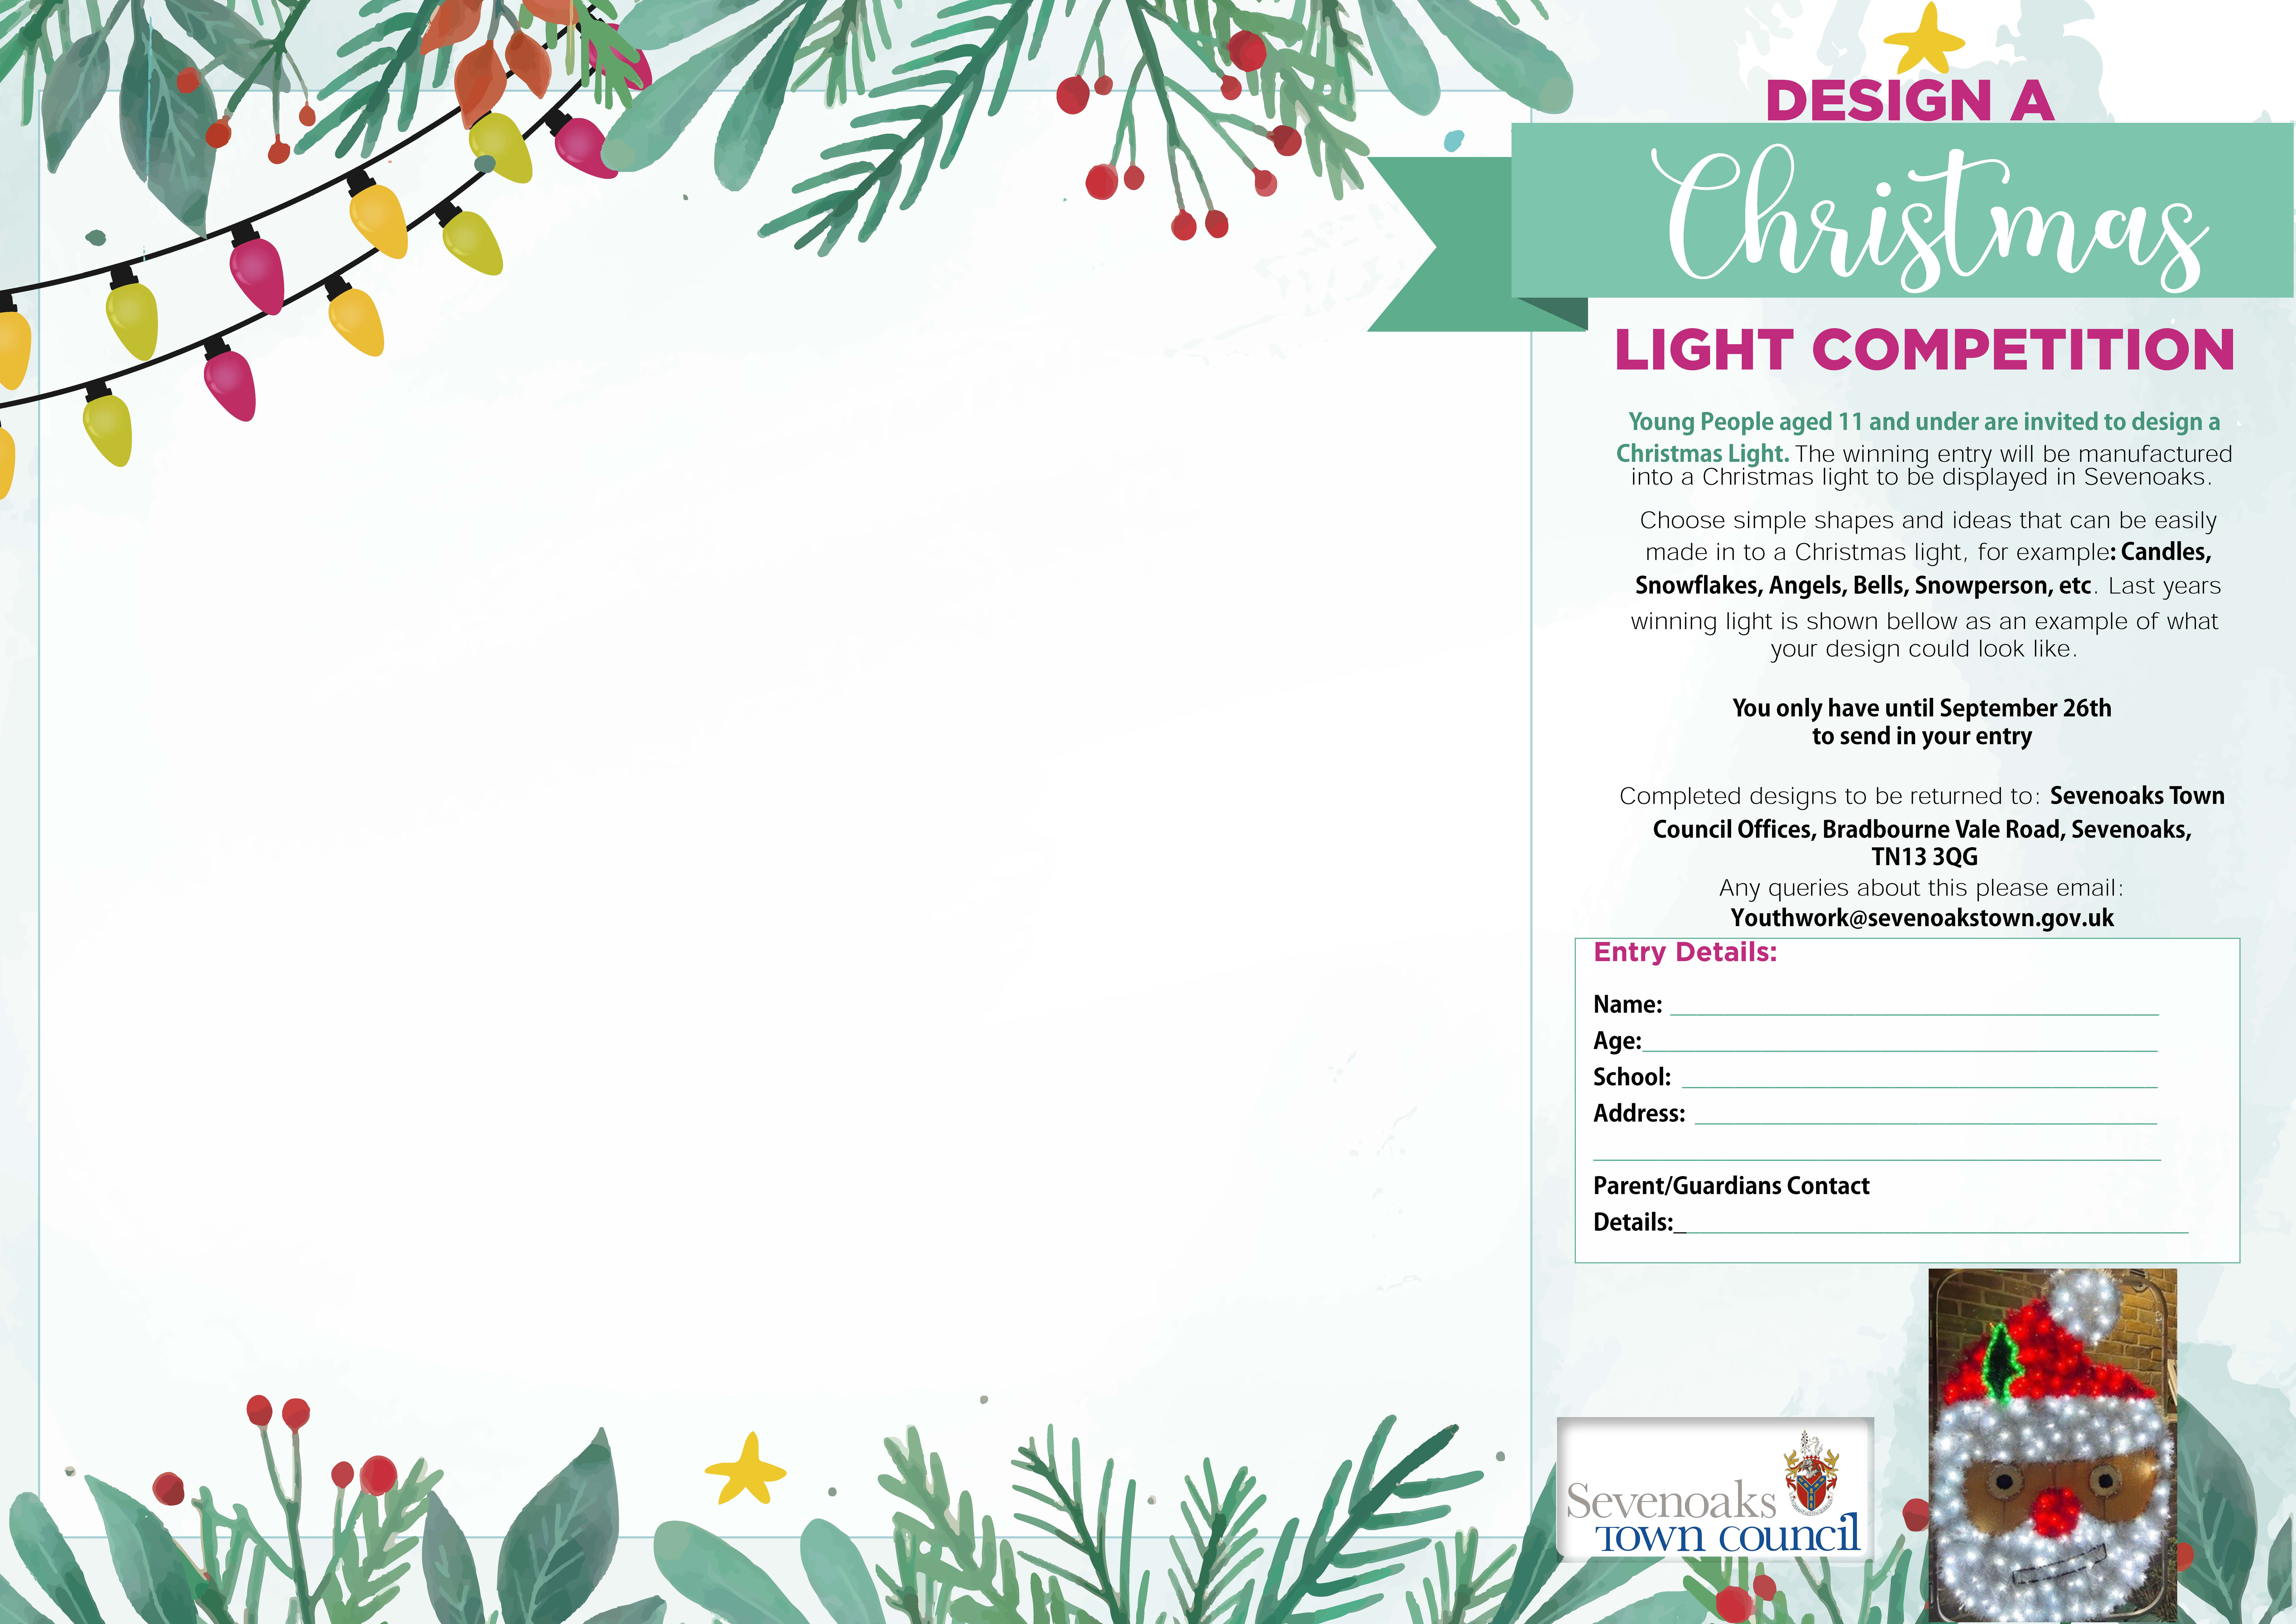 PRESS RELEASE: Sevenoaks Town Council To hold A Christmas Light Design Competition